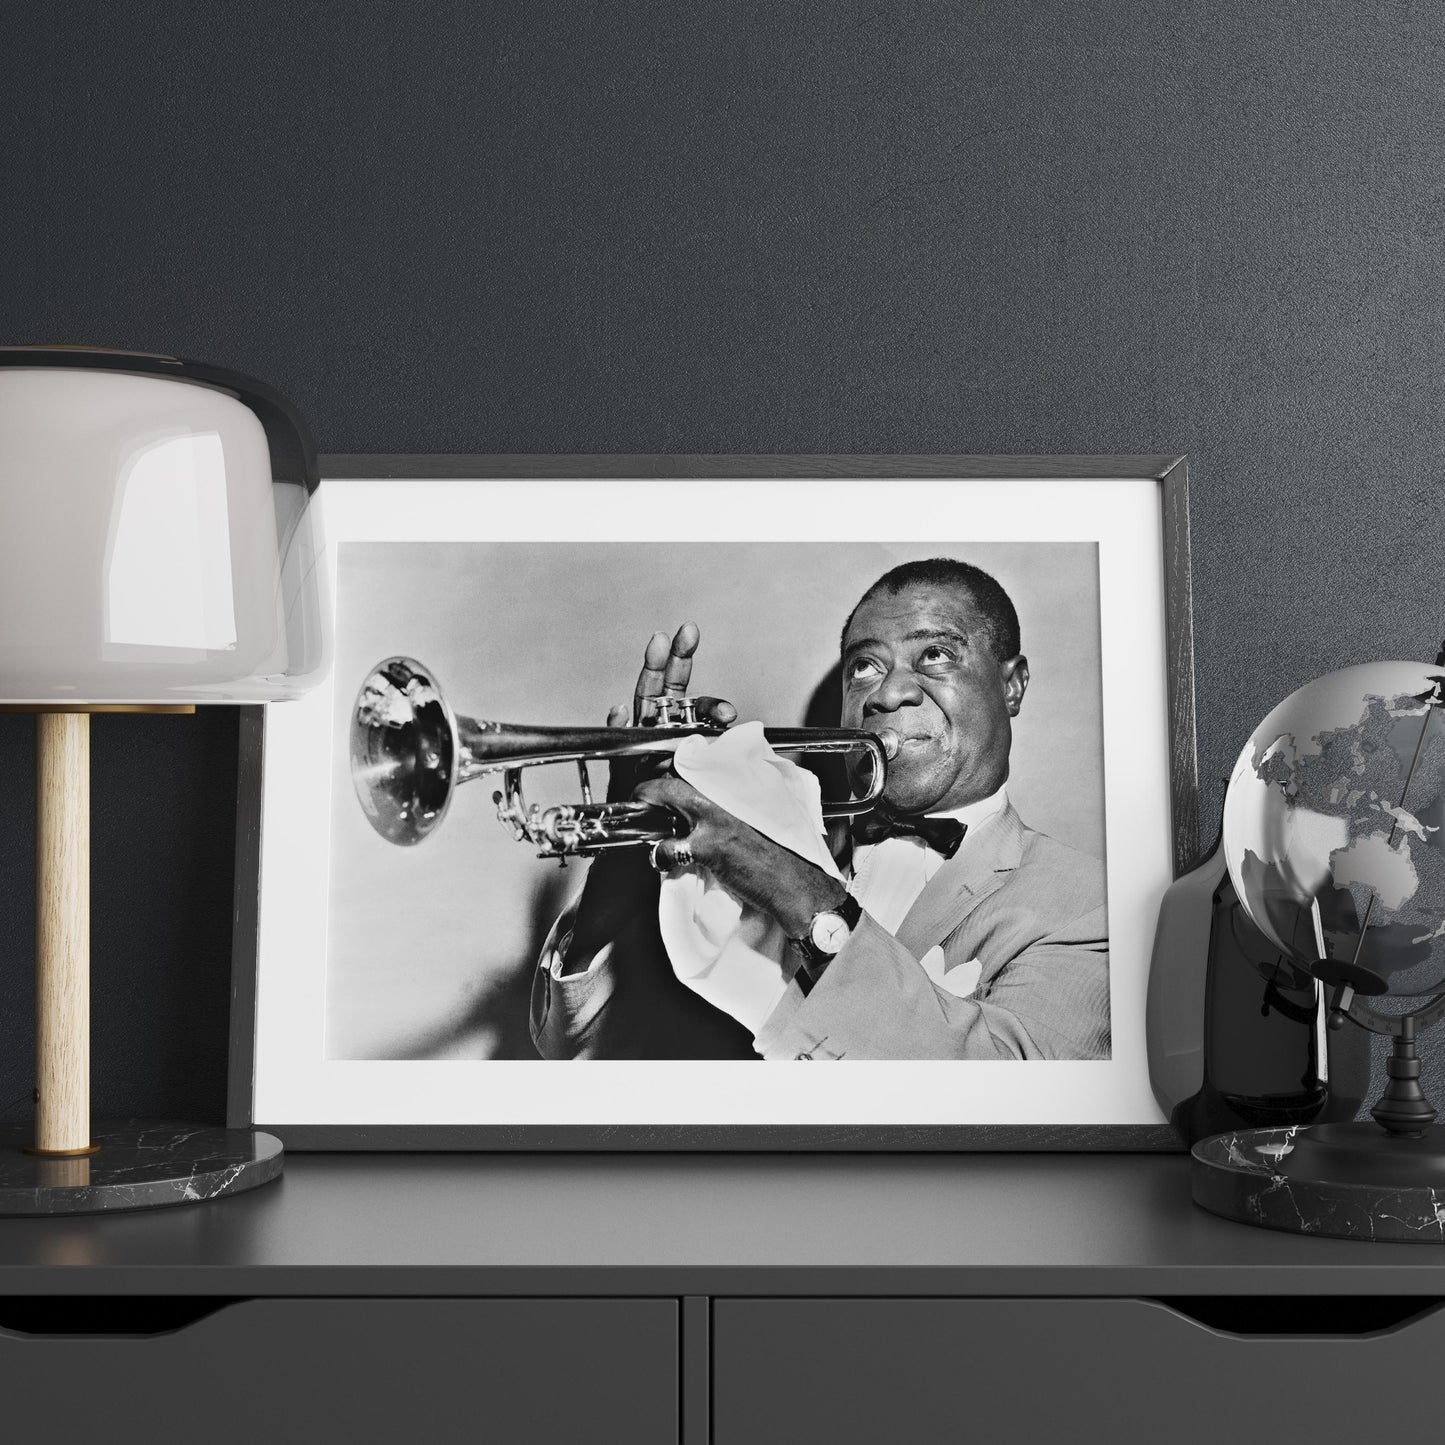 Louis Armstrong playing the trumpet